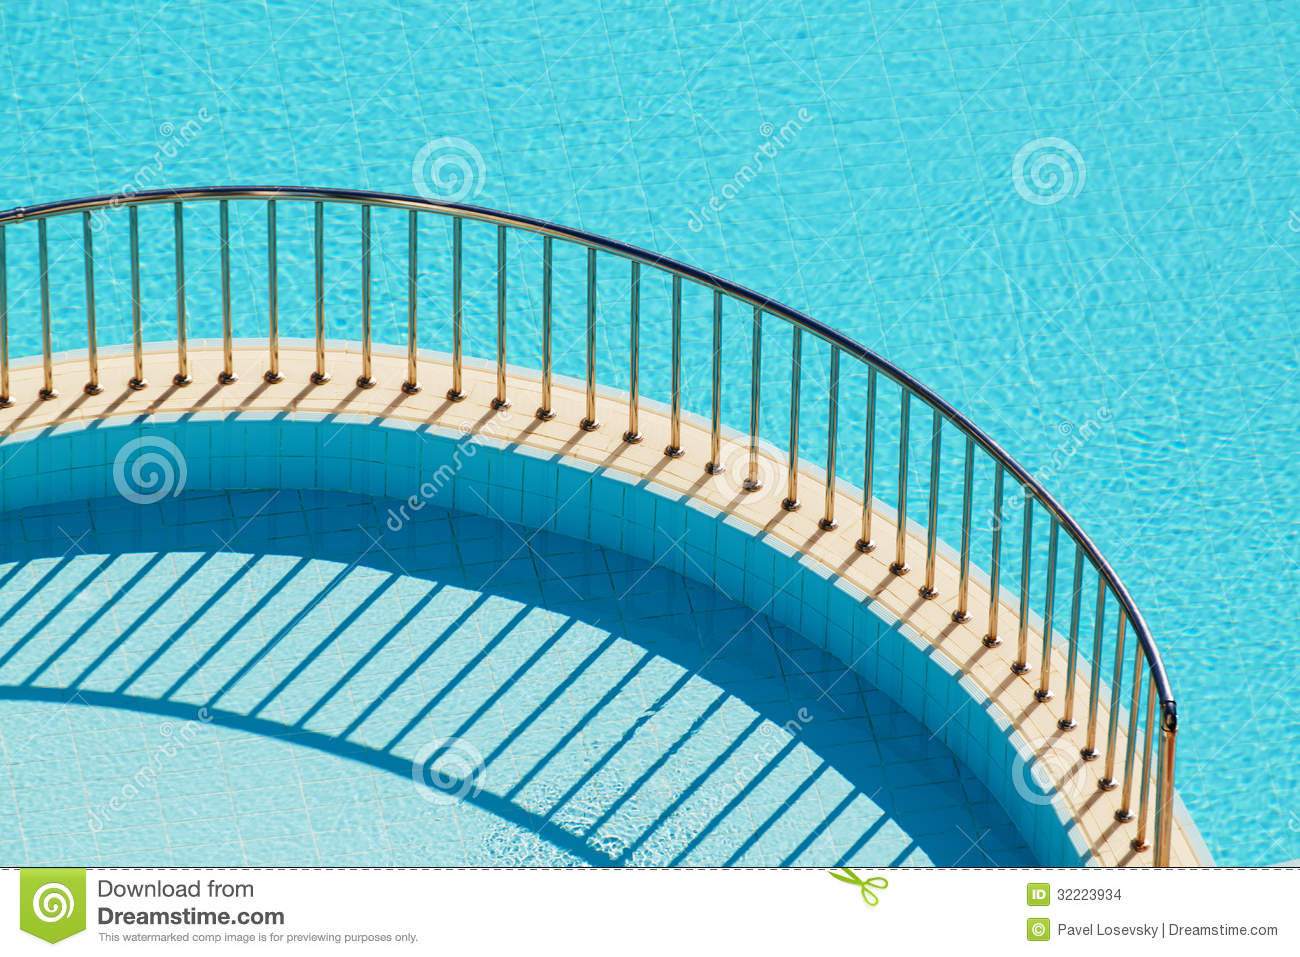 Ledge With Railing Separating Pools Stock Images   Image  32223934